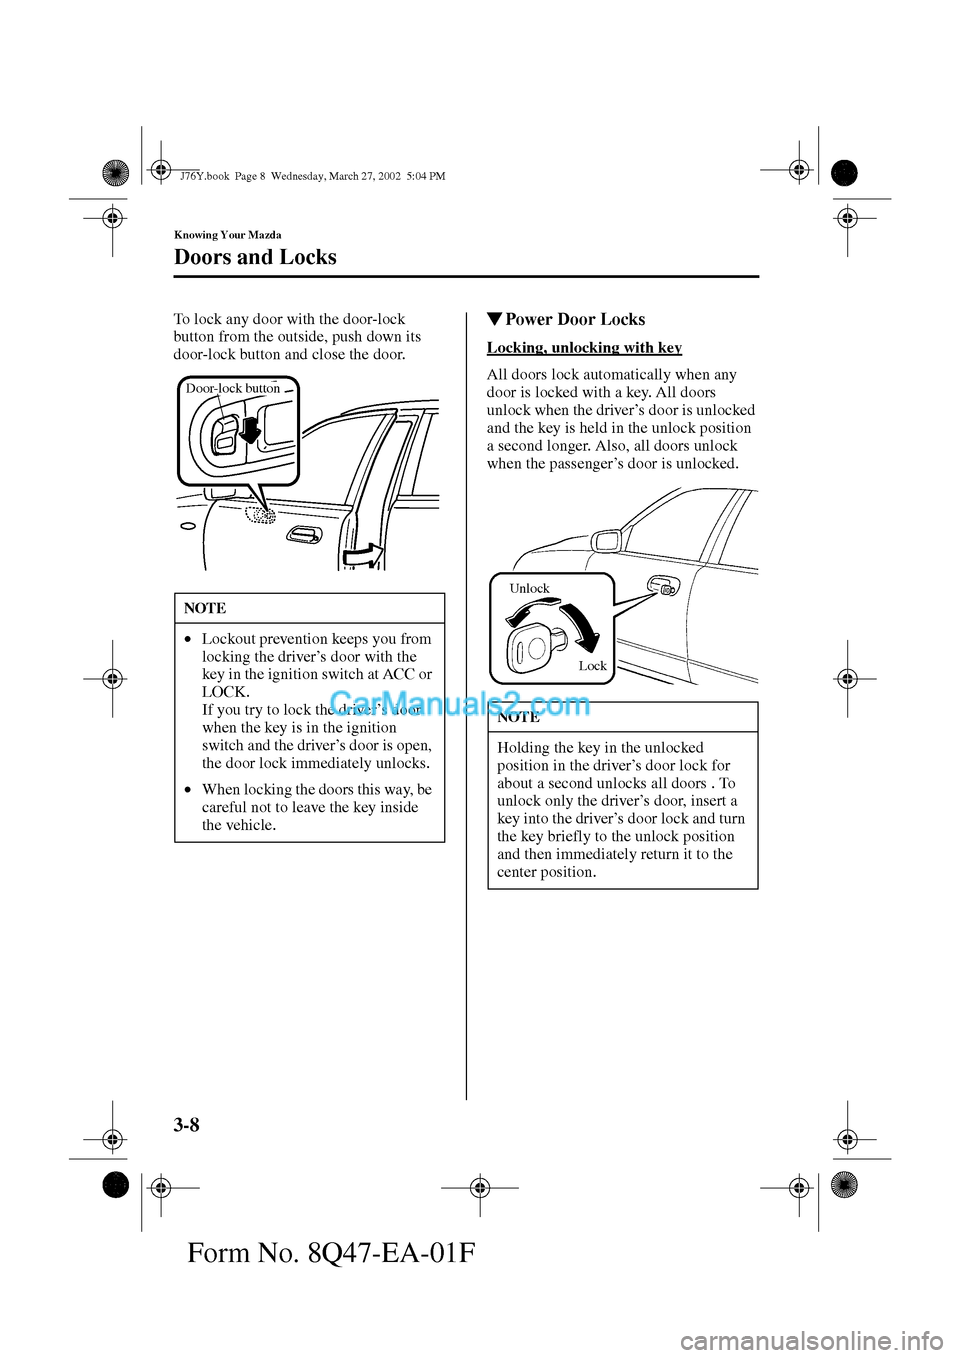 MAZDA MODEL MILLENIA 2002   (in English) Service Manual 3-8
Knowing Your Mazda
Doors and Locks
Form No. 8Q47-EA-01F
To lock any door with the door-lock 
button from the outside, push down its 
door-lock button and close the door.Power Door Locks
Locking, 